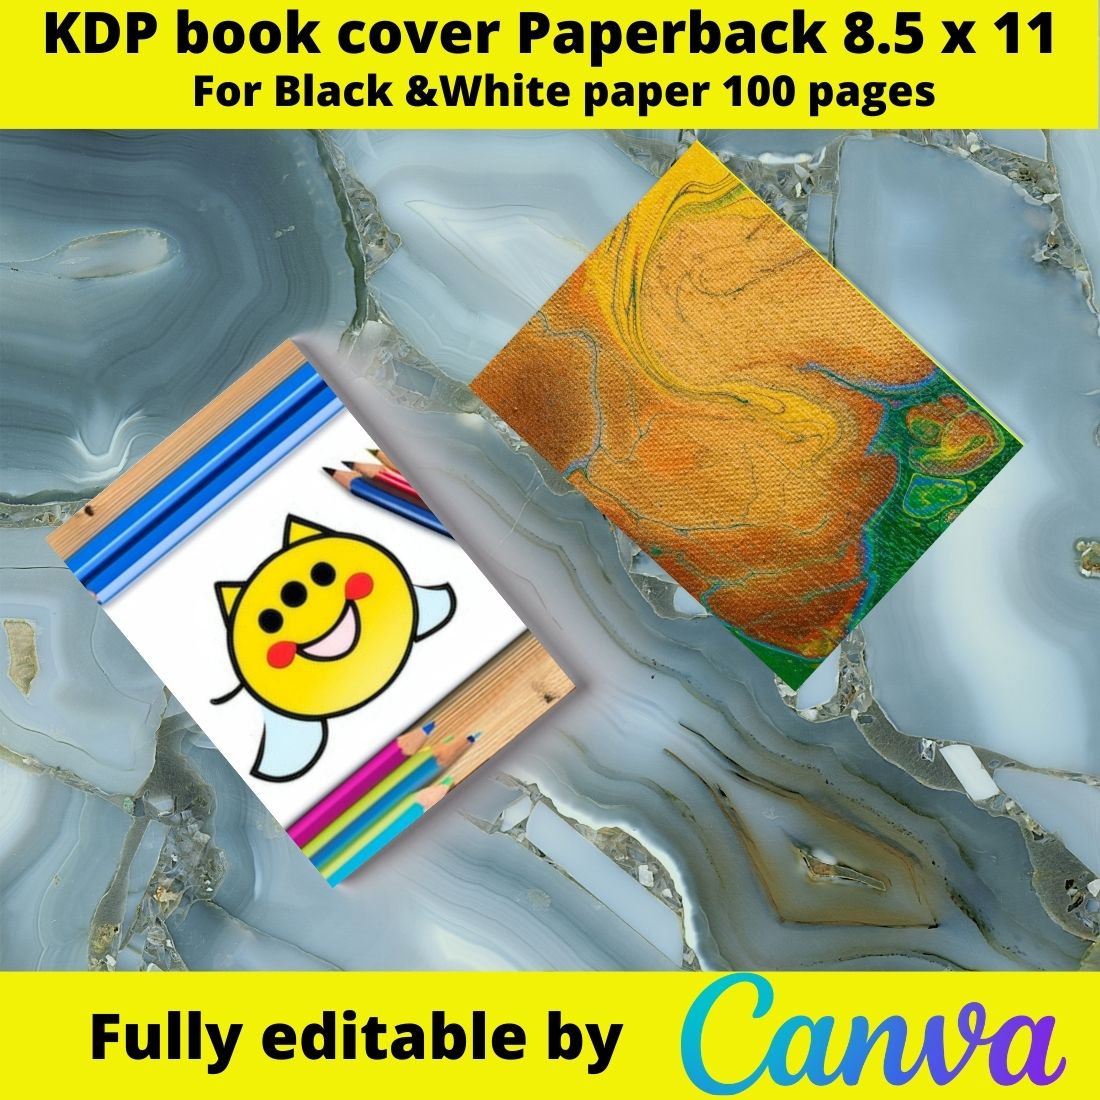 Our KDP book covers will bring your story to life for young readers preview image.